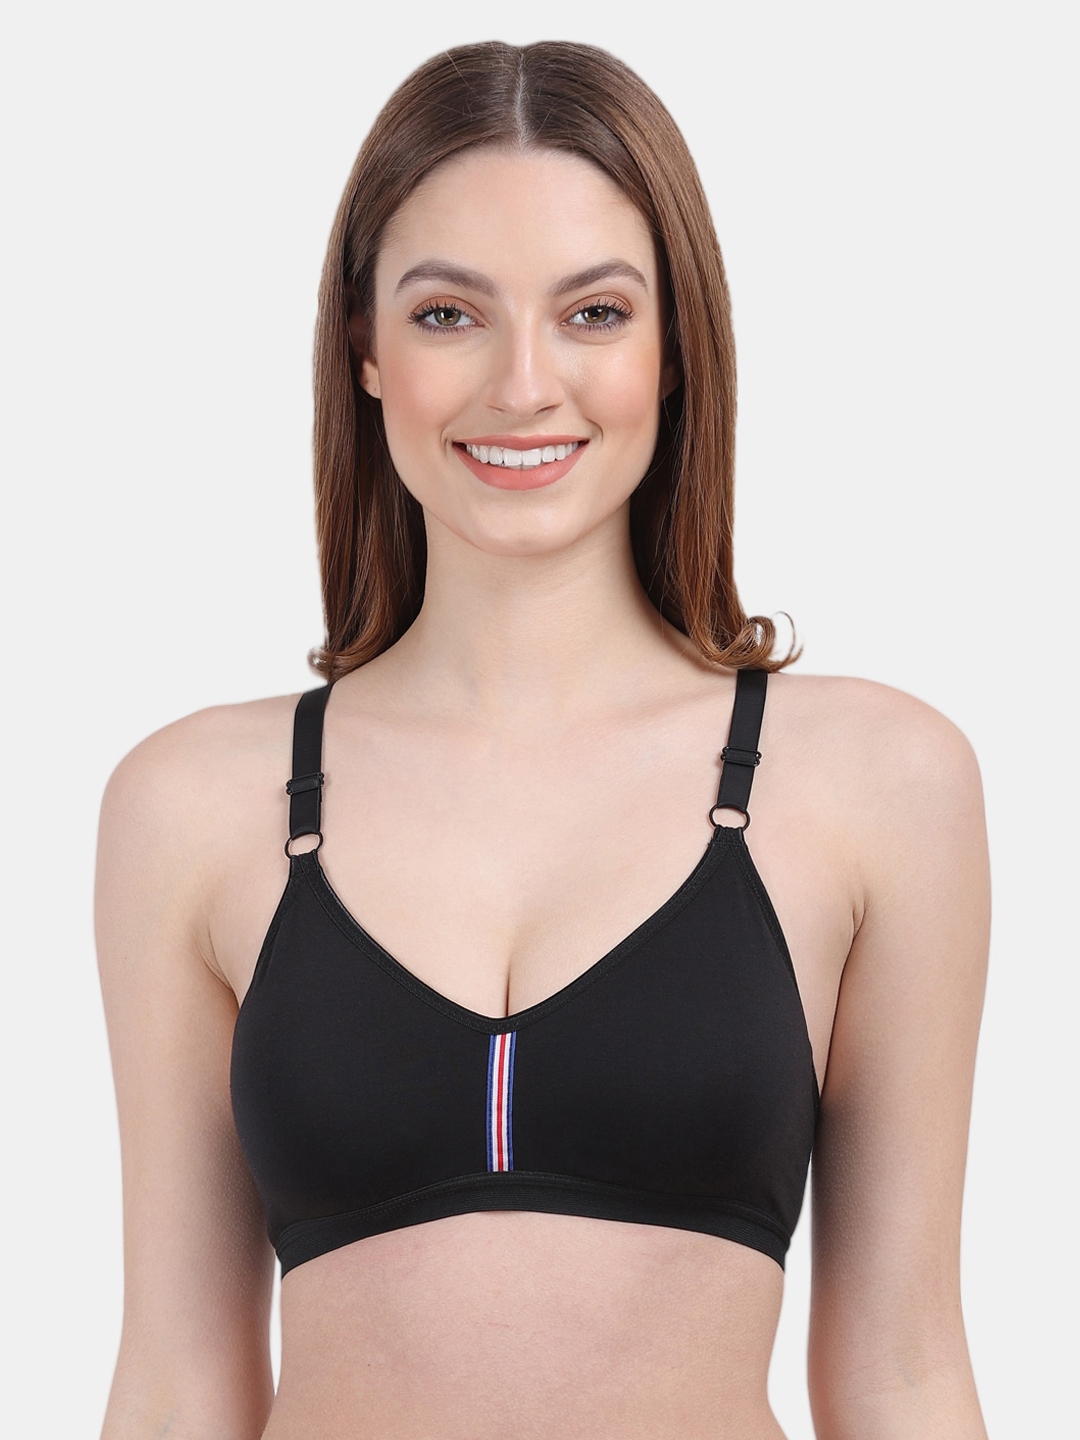 Sonari Lingerie - This bra is perfect for everyday wear, it's